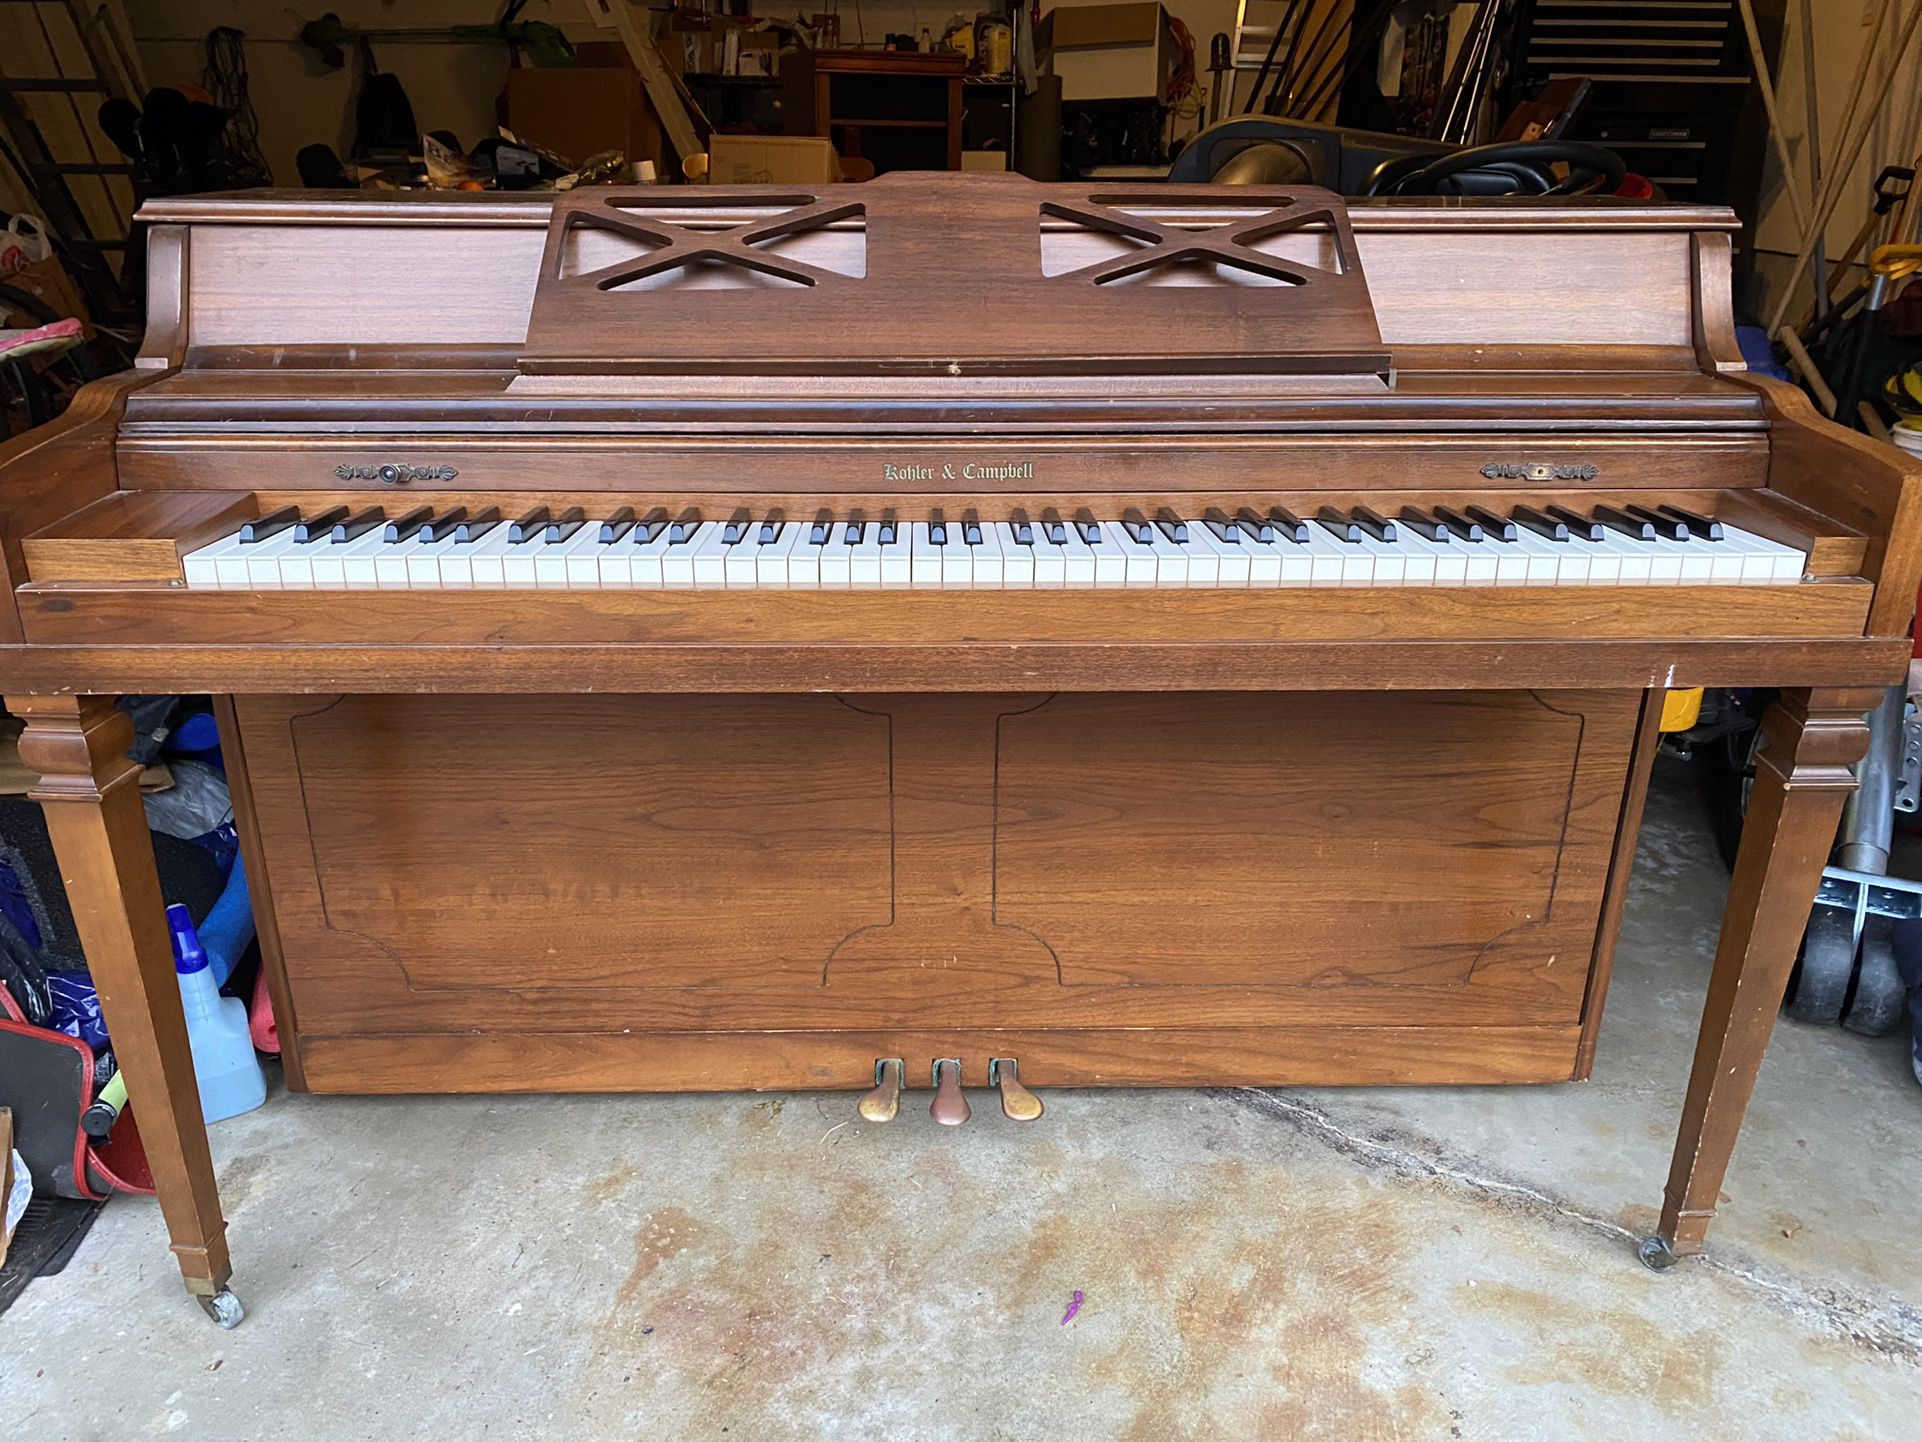 FREE Kohler & Campbell console piano in great condition. Easy NO STAIRS load in!